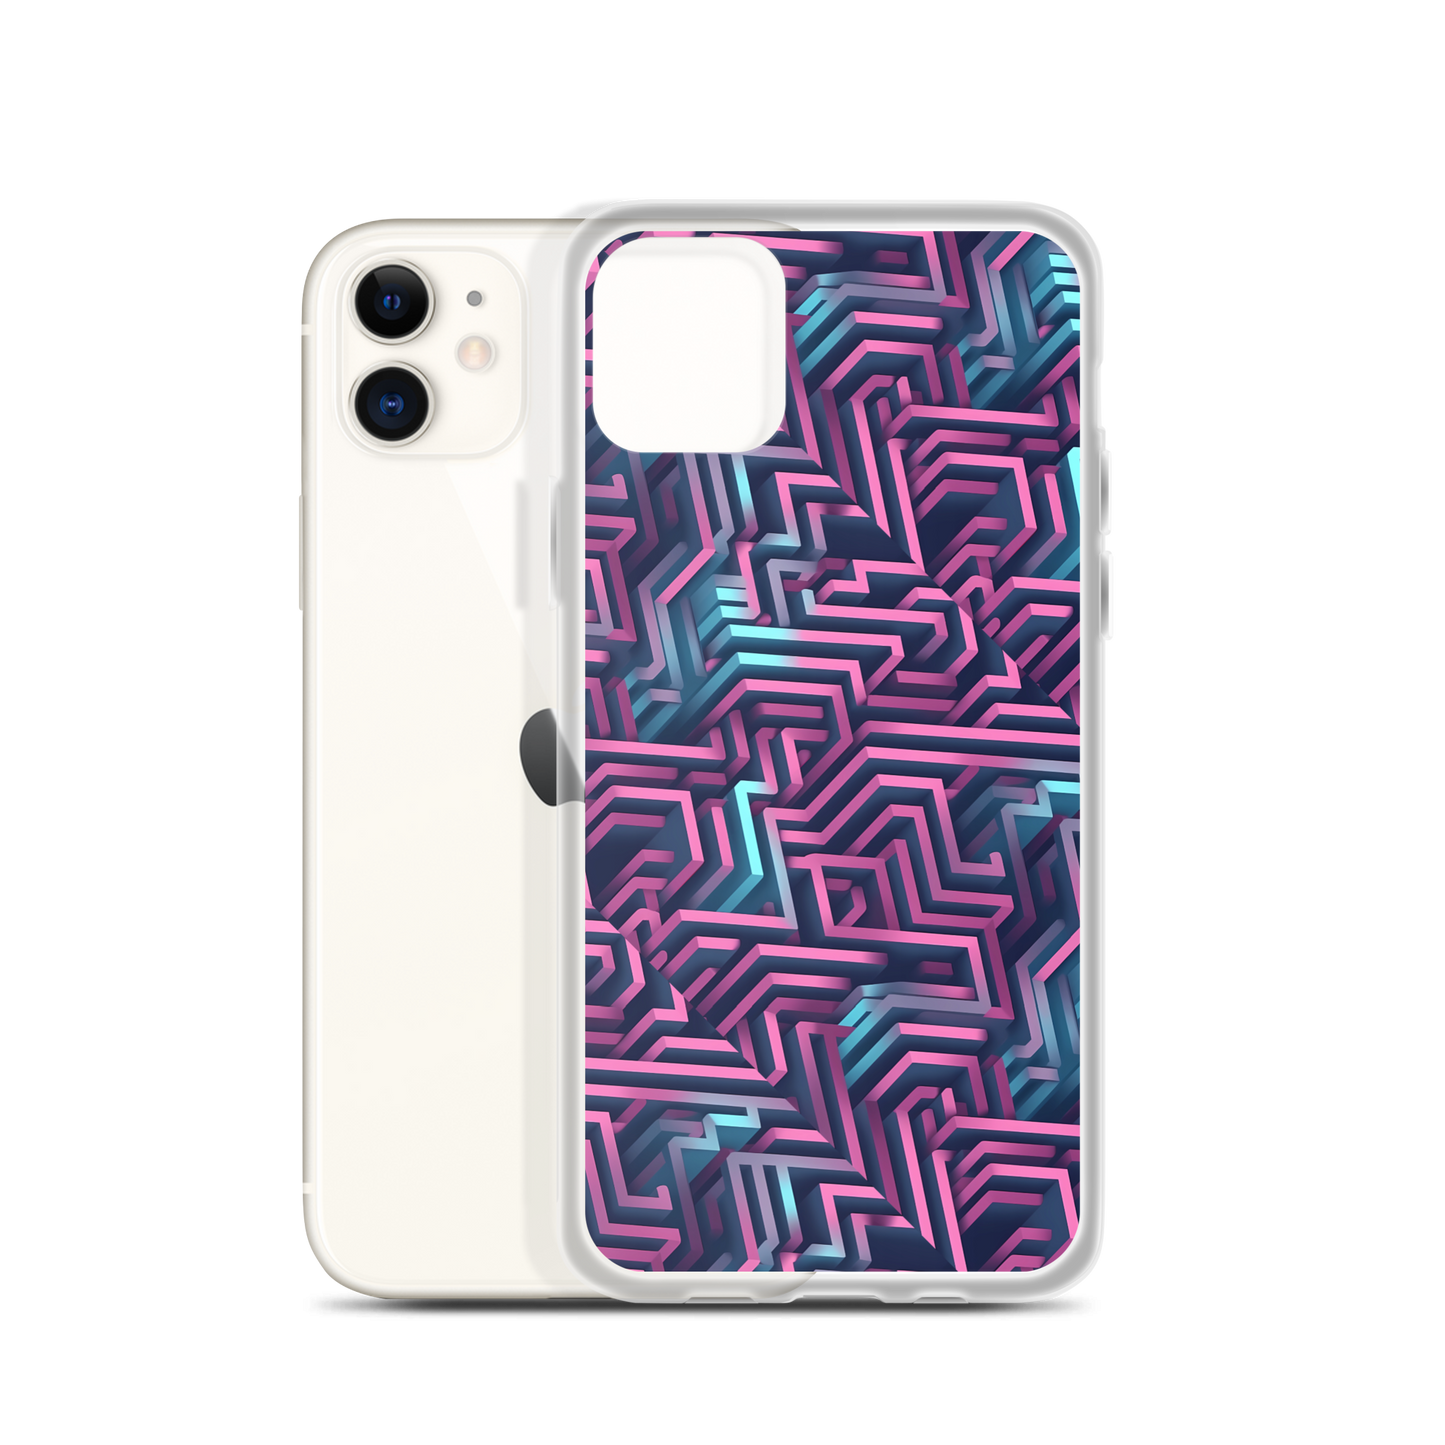 3D Maze Illusion | 3D Patterns | Clear Case for iPhone - #3